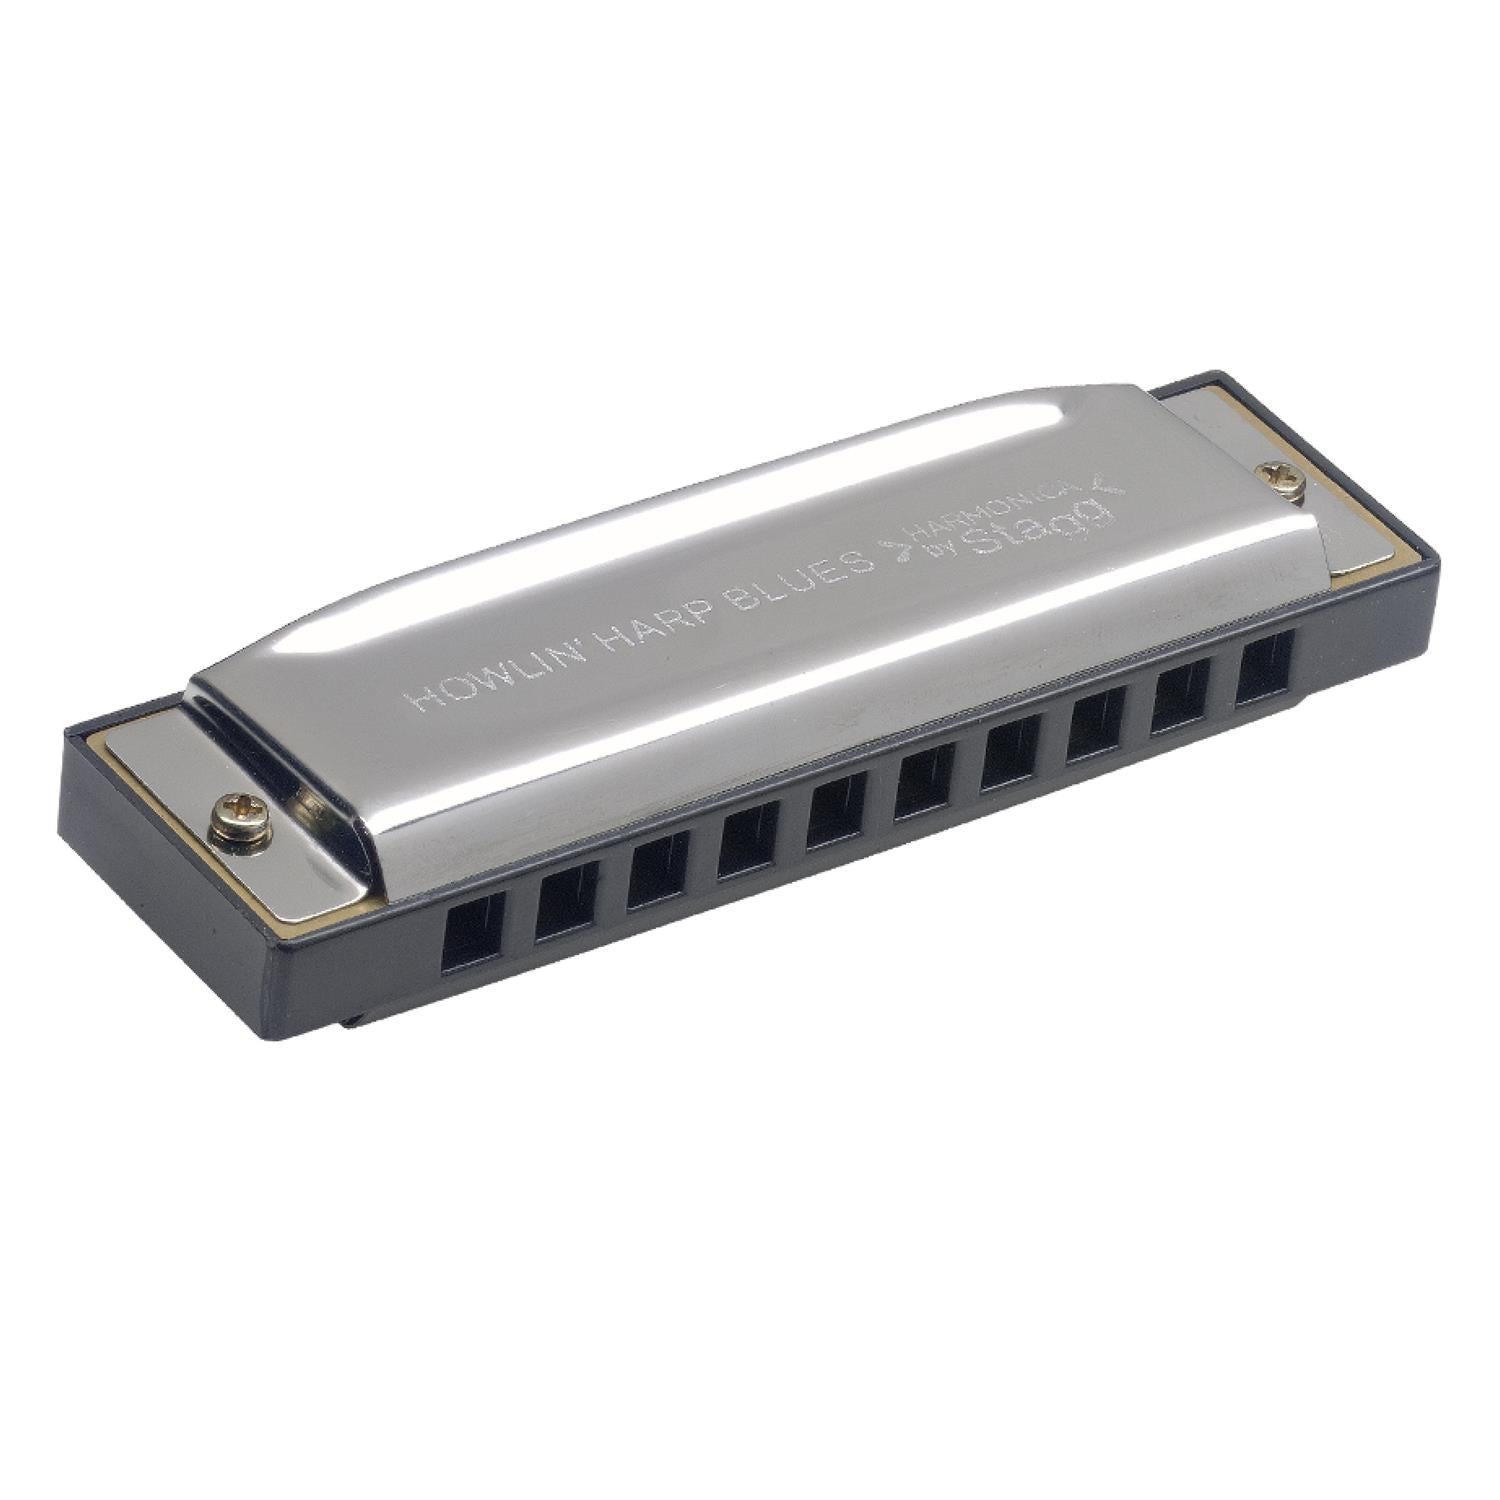 Stagg BJH-B20 G Blues Harmonica in G Major - DY Pro Audio